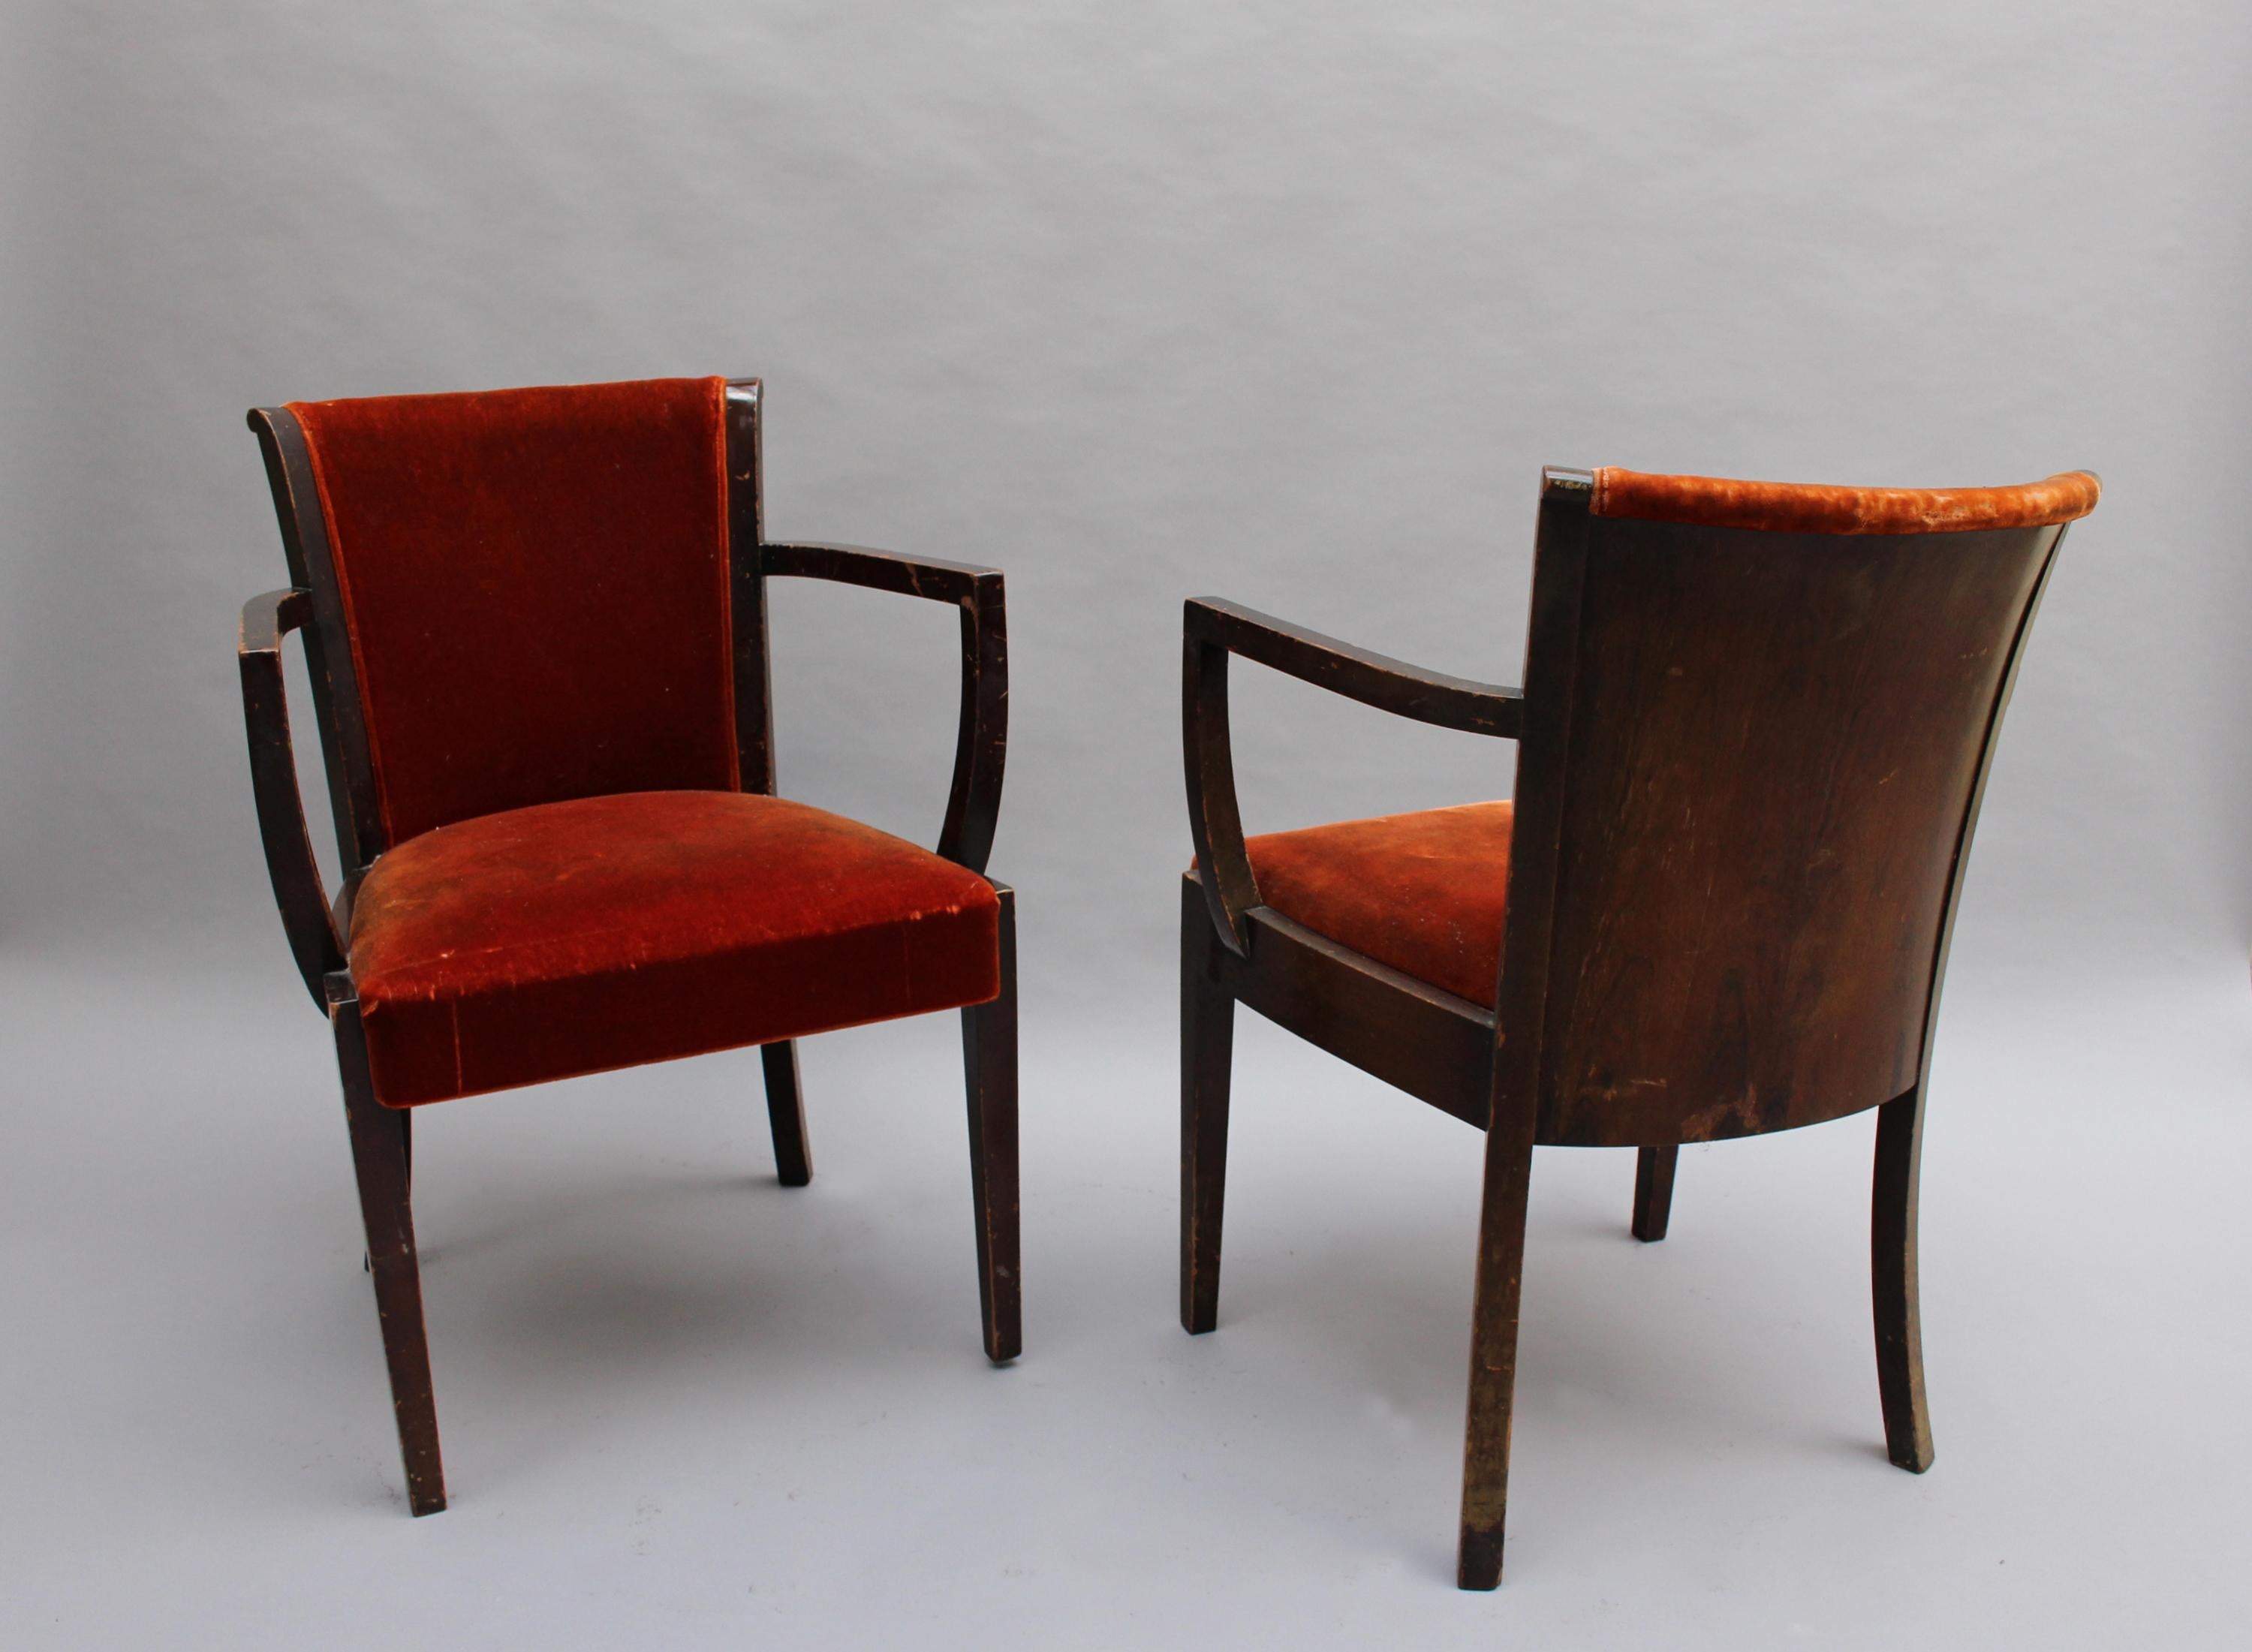 French Set of 6 Fine Belgium Art Deco Chairs by De Coene (4 Side and 2 Arm) For Sale